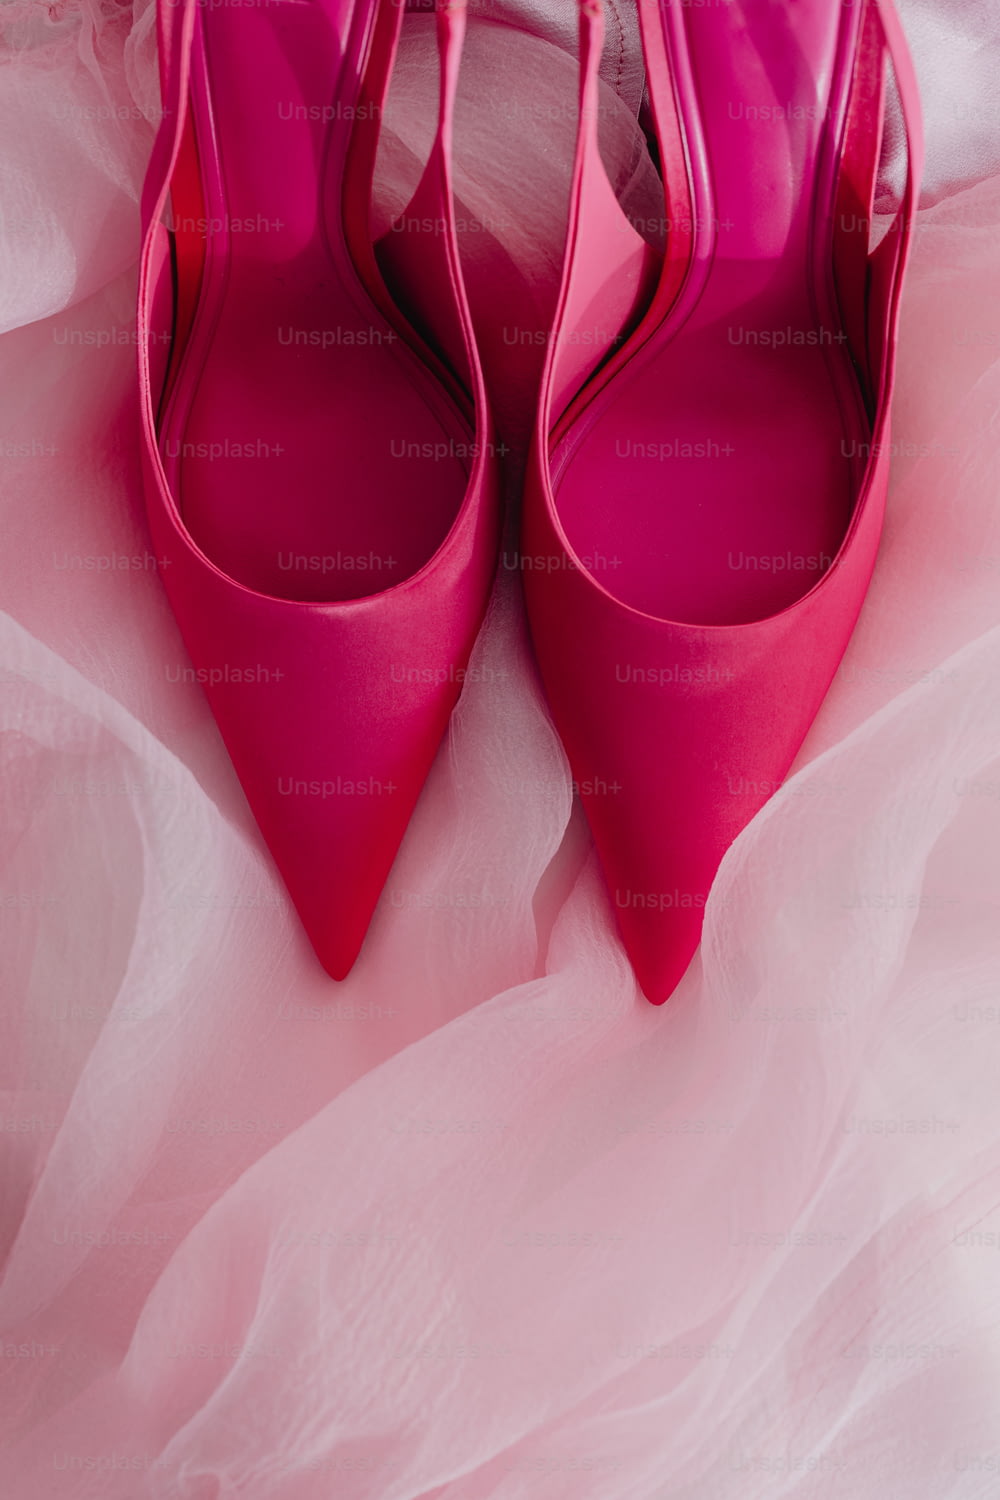 a pair of pink shoes sitting on top of a bed